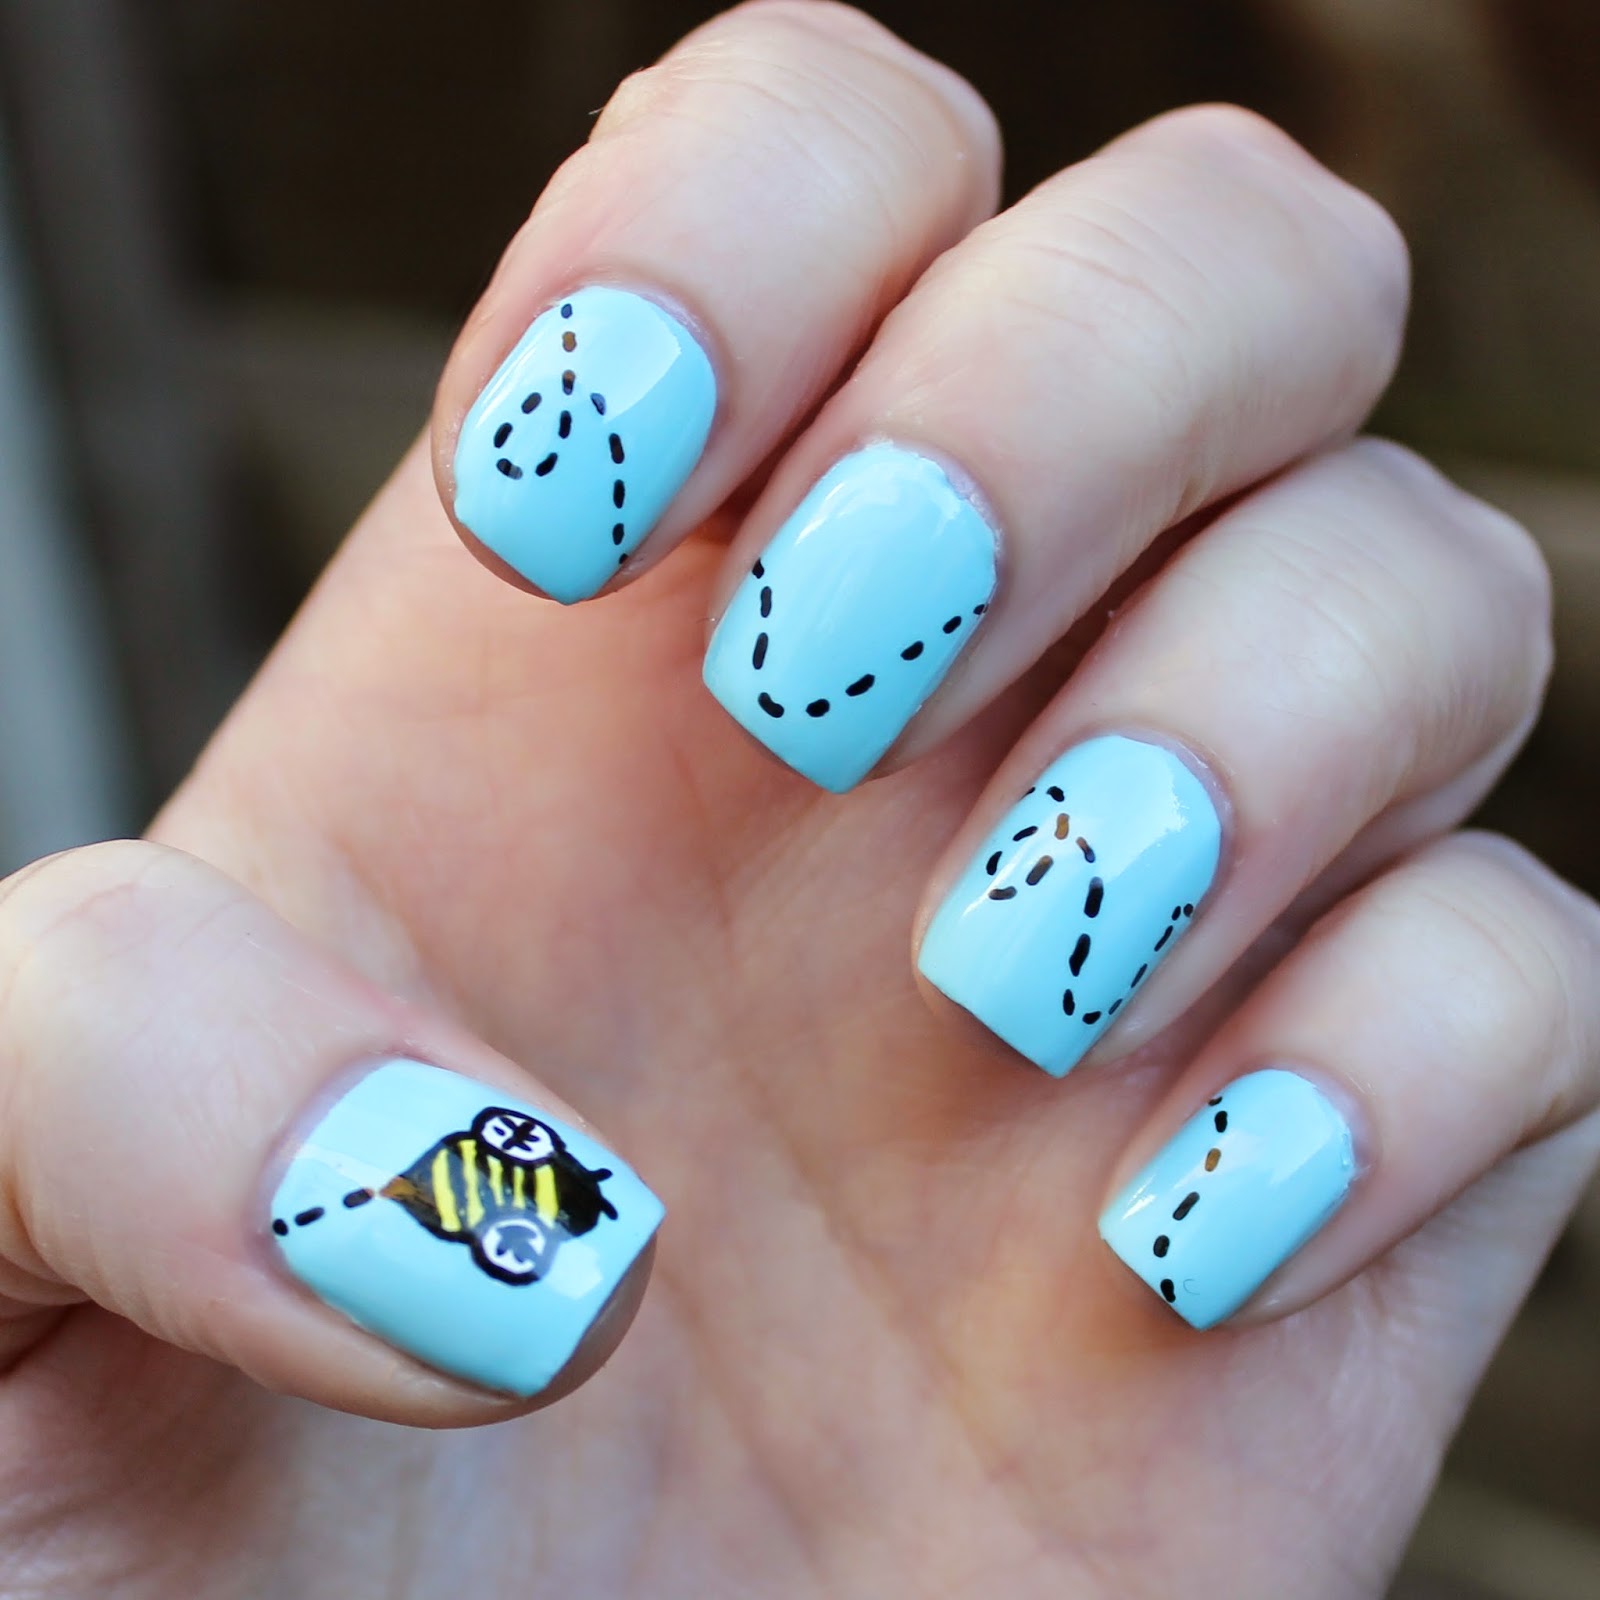 Dahlia Nails: The Little Busy Bee